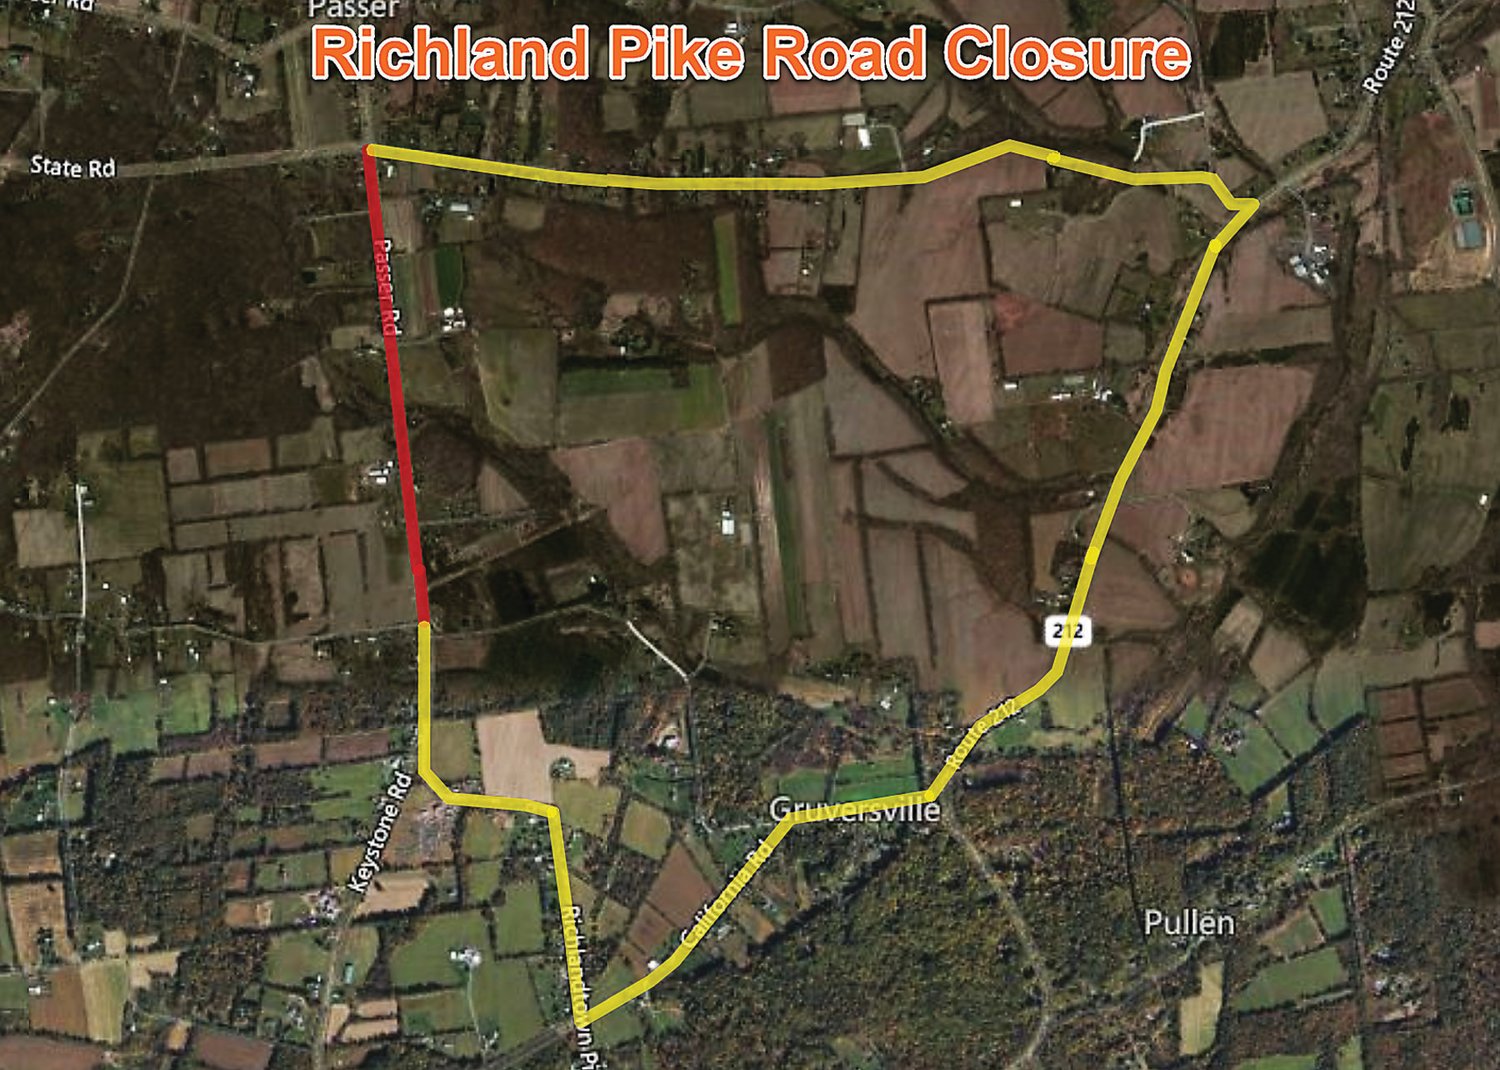 This map shows the detour, in effect beginning Monday, May 24, for the replacement of the culvert carrying Richland Pike over Cooks Creek in Springfield Township.